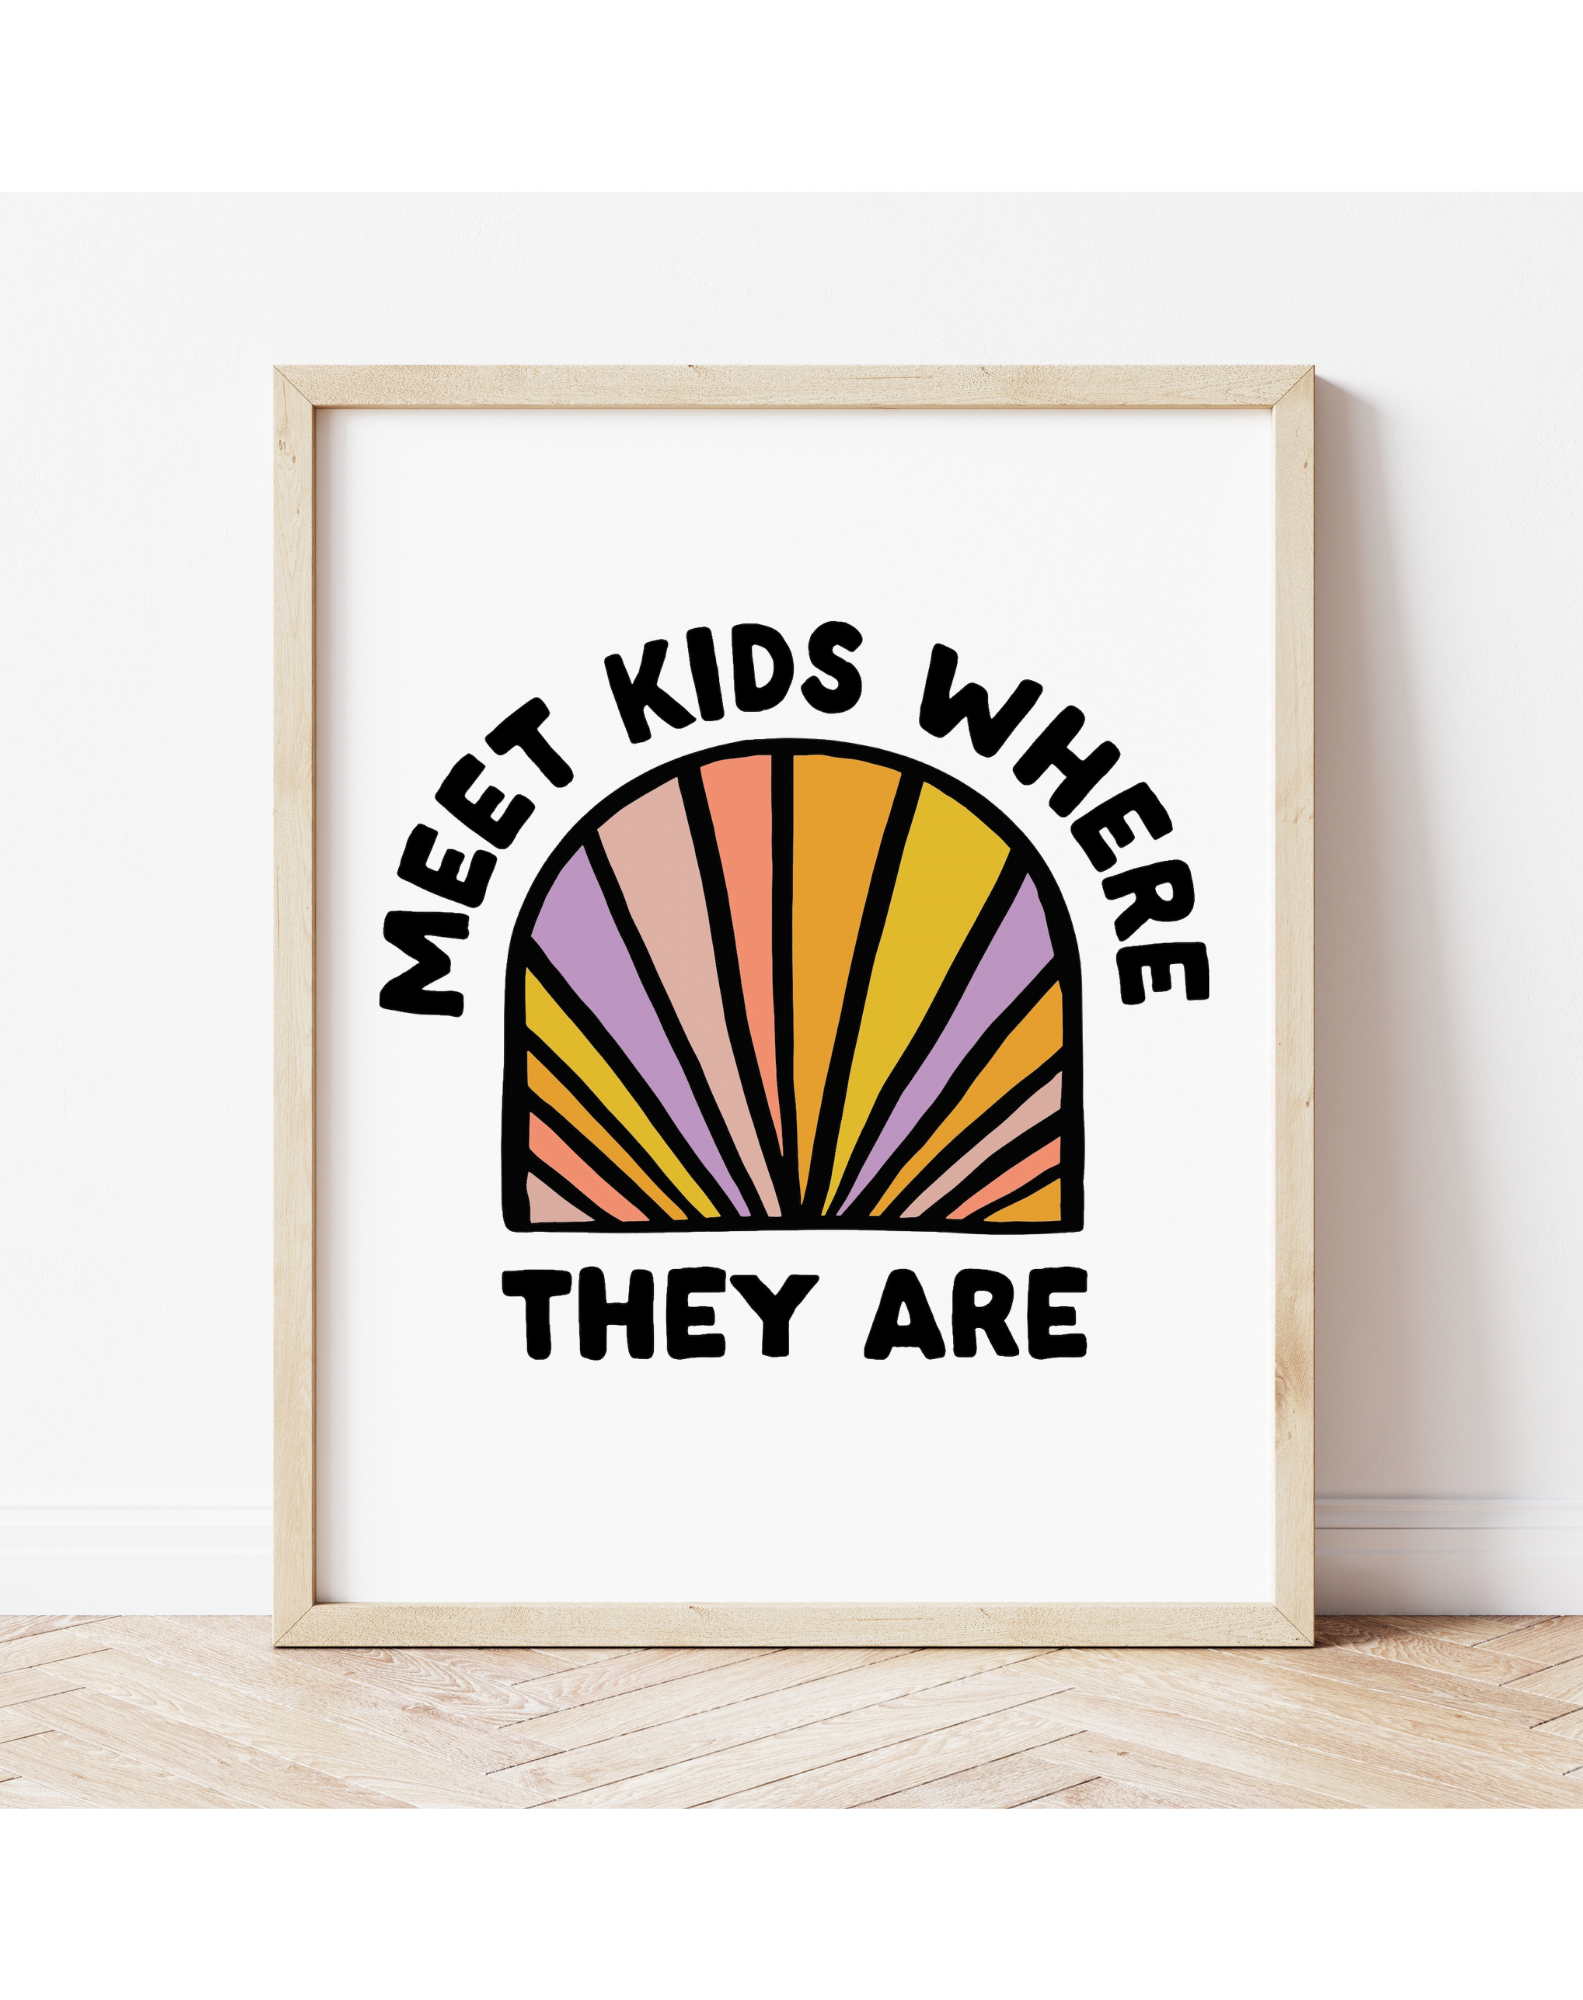 Meet Kids Where They Are Print